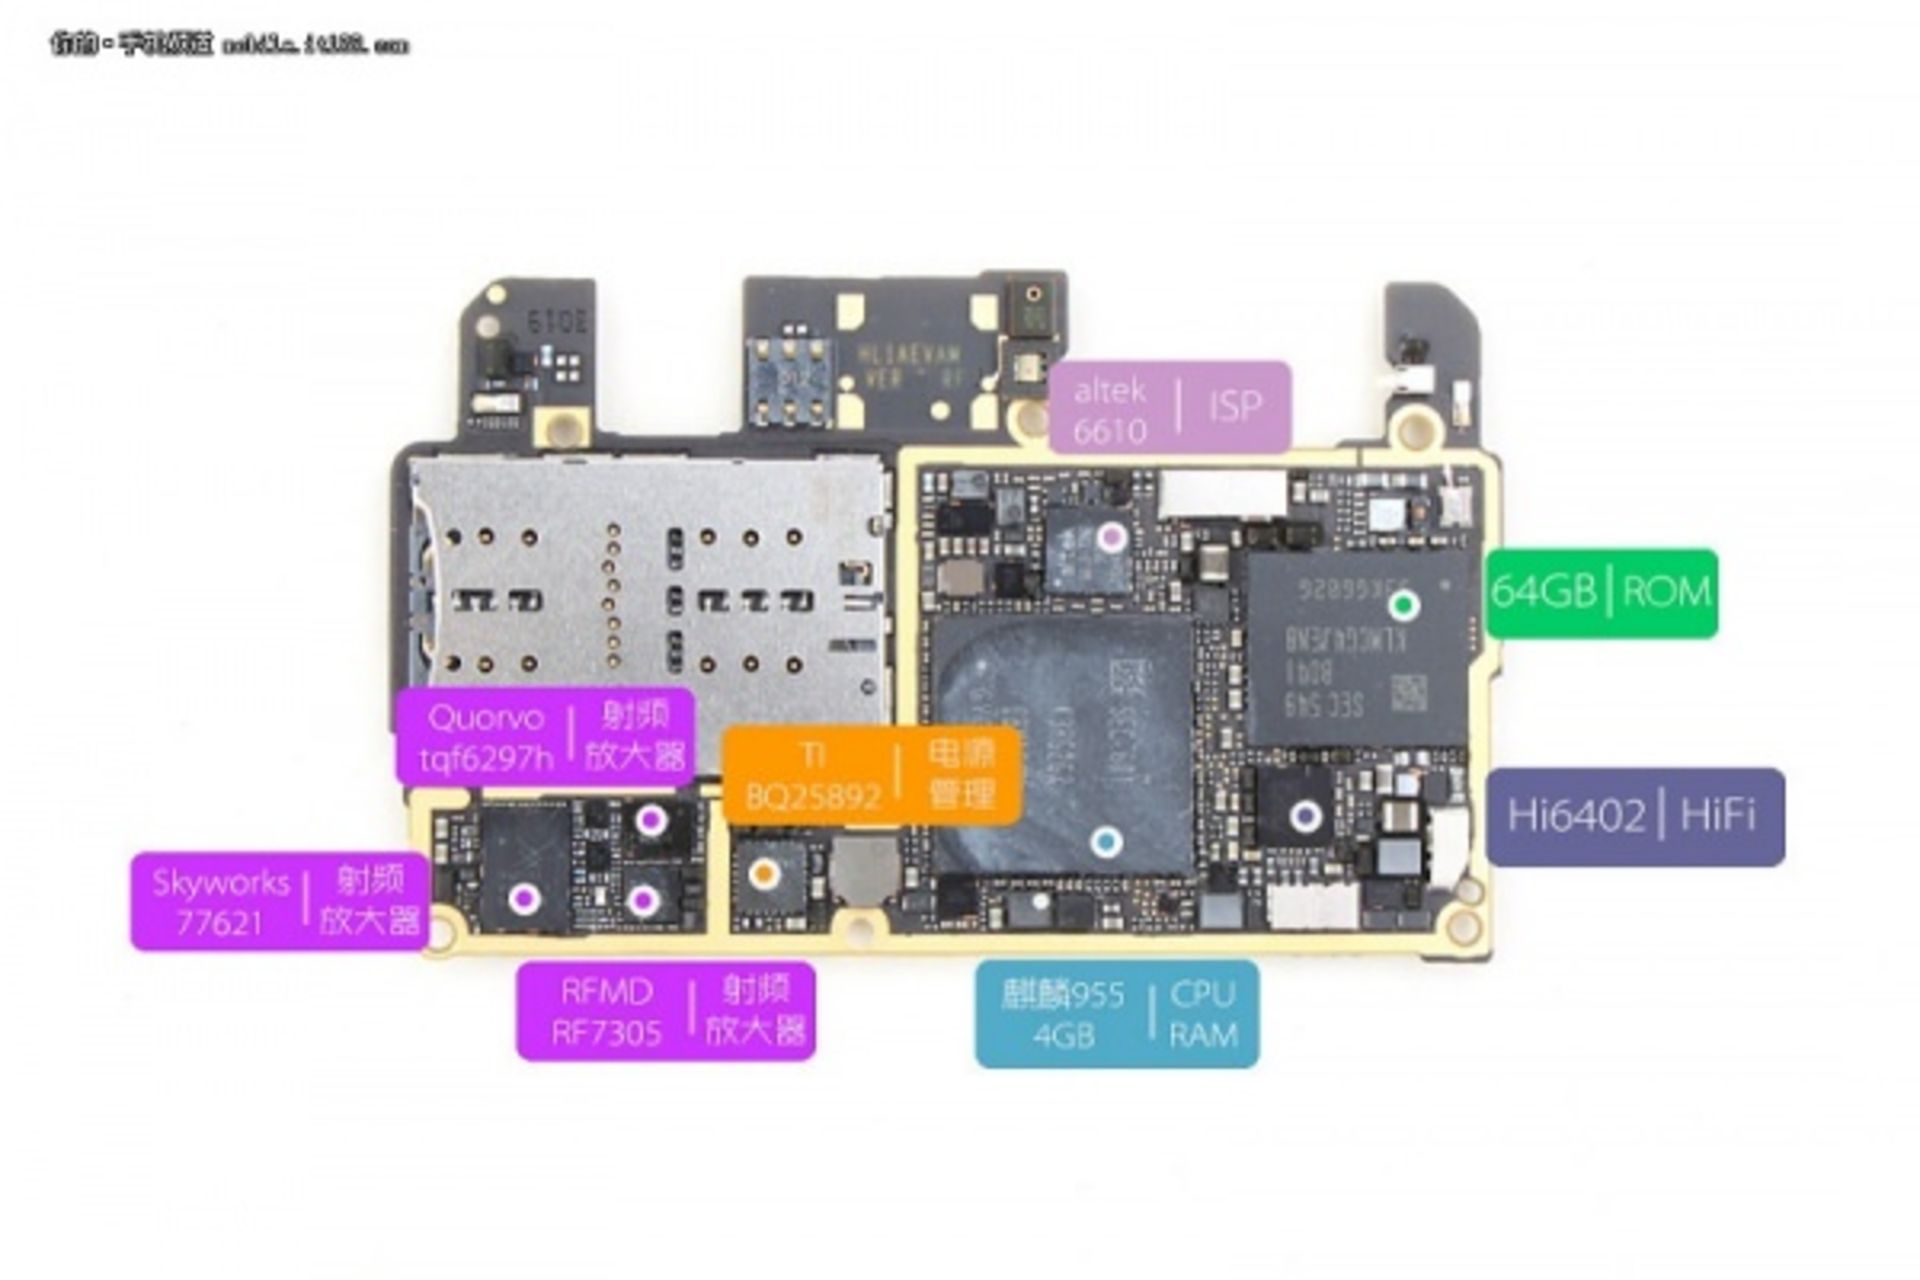 huawei p9 internal components